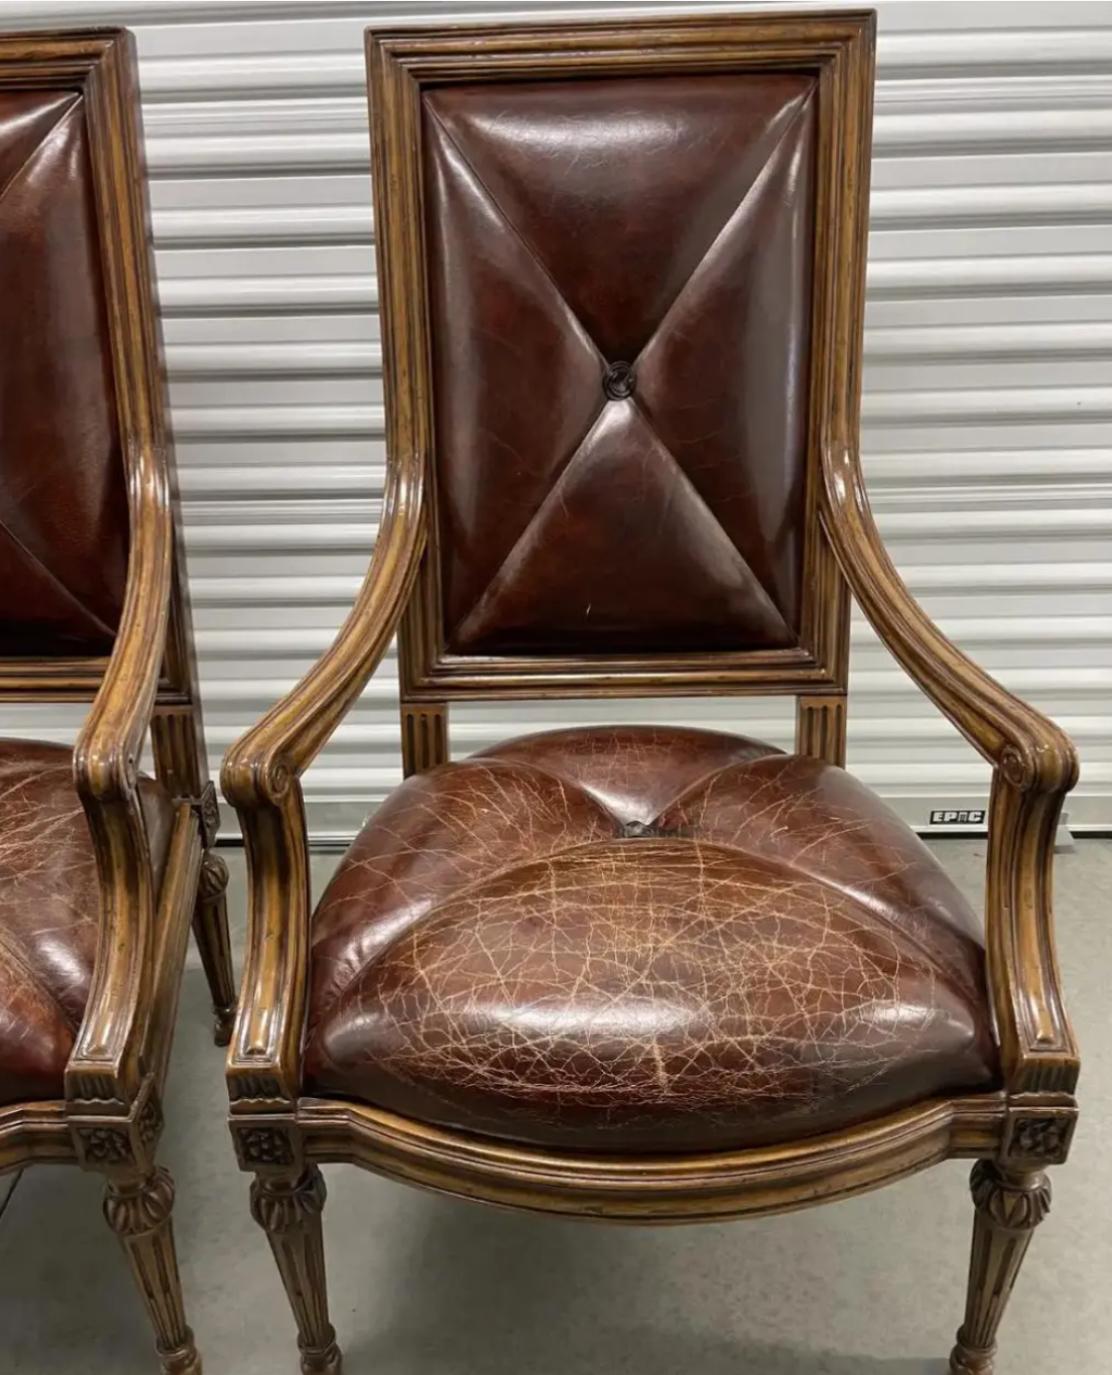 Pair of 18th C Style Hendrix Allardyce Tufted Leather Giltwood Arm Chairs.